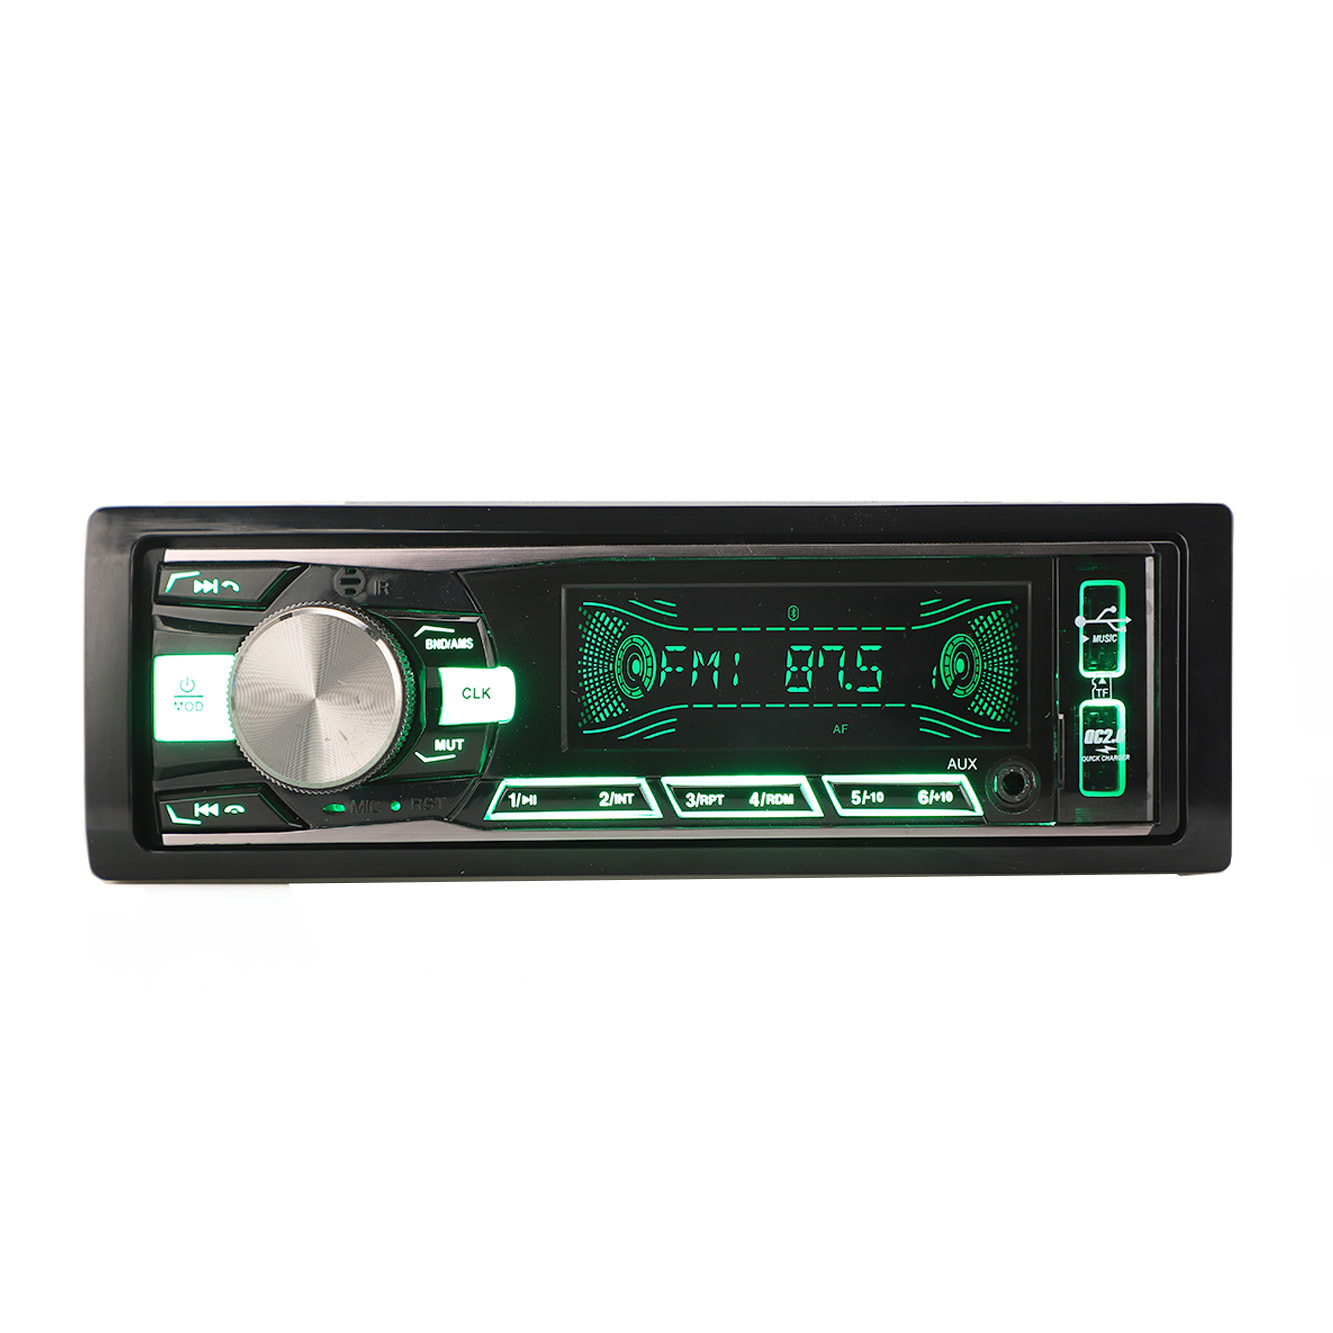 Car Part Car LCD Player Car Video Player Video Audio Fixed Panel Player FM Car Stereo Audio Radio Car MP3 Player